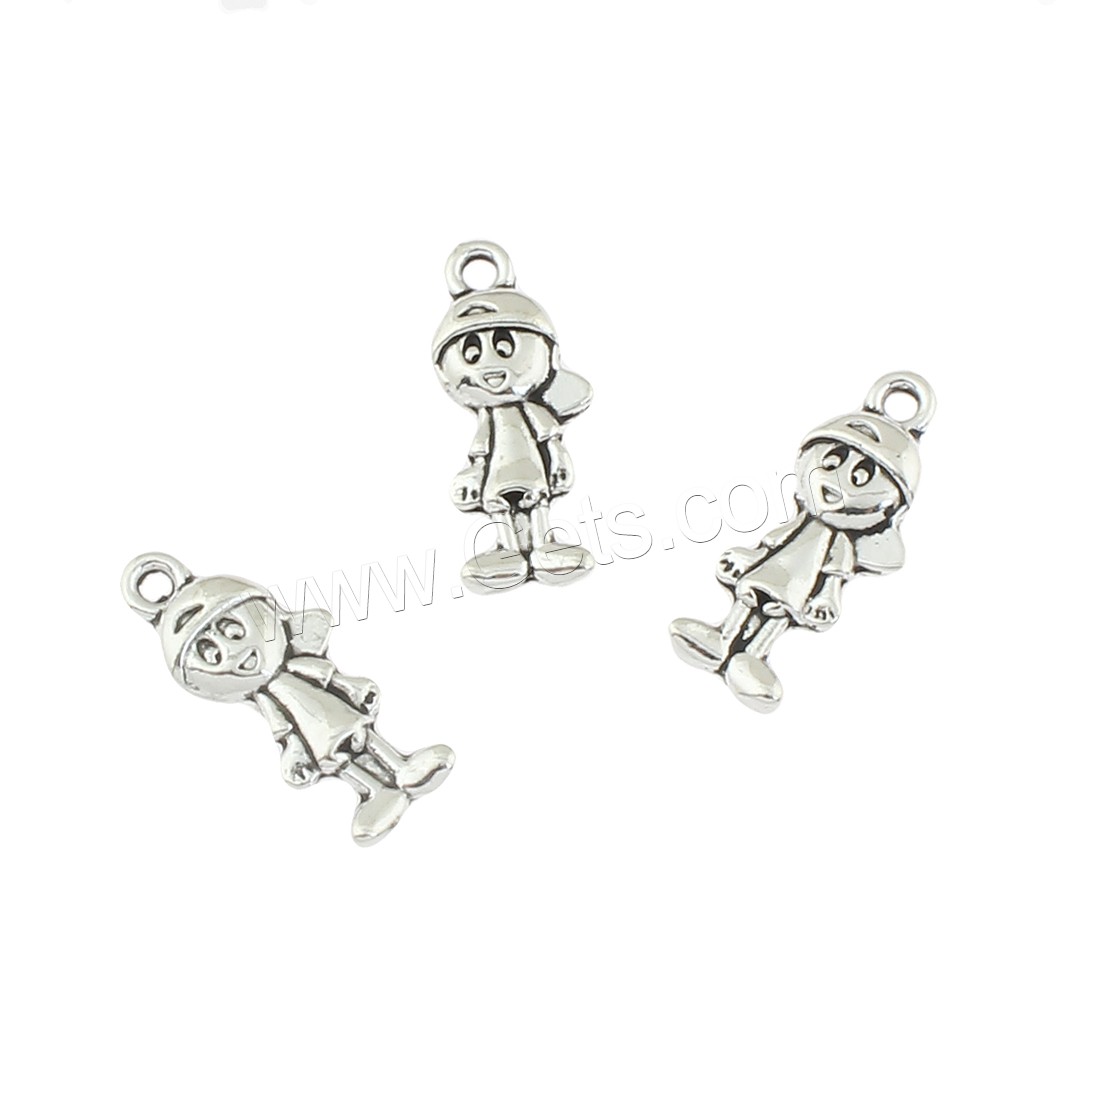 Zinc Alloy Jewelry Pendants, Girl, antique silver color plated, 8x19x3mm, Hole:Approx 1mm, Approx 500PCs/Bag, Sold By Bag